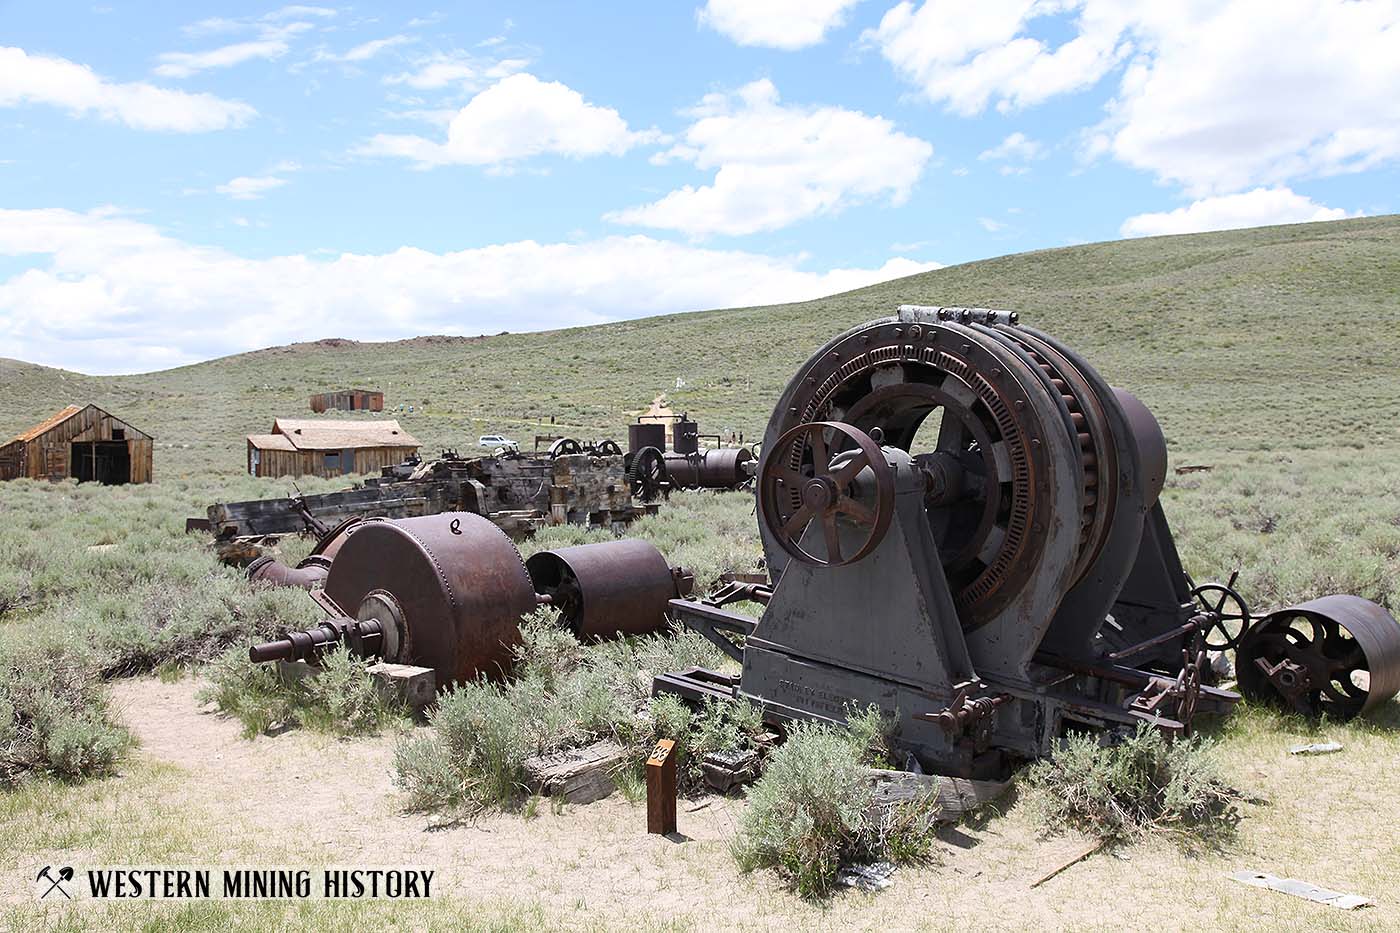 Old mining equipment at Bodie, California